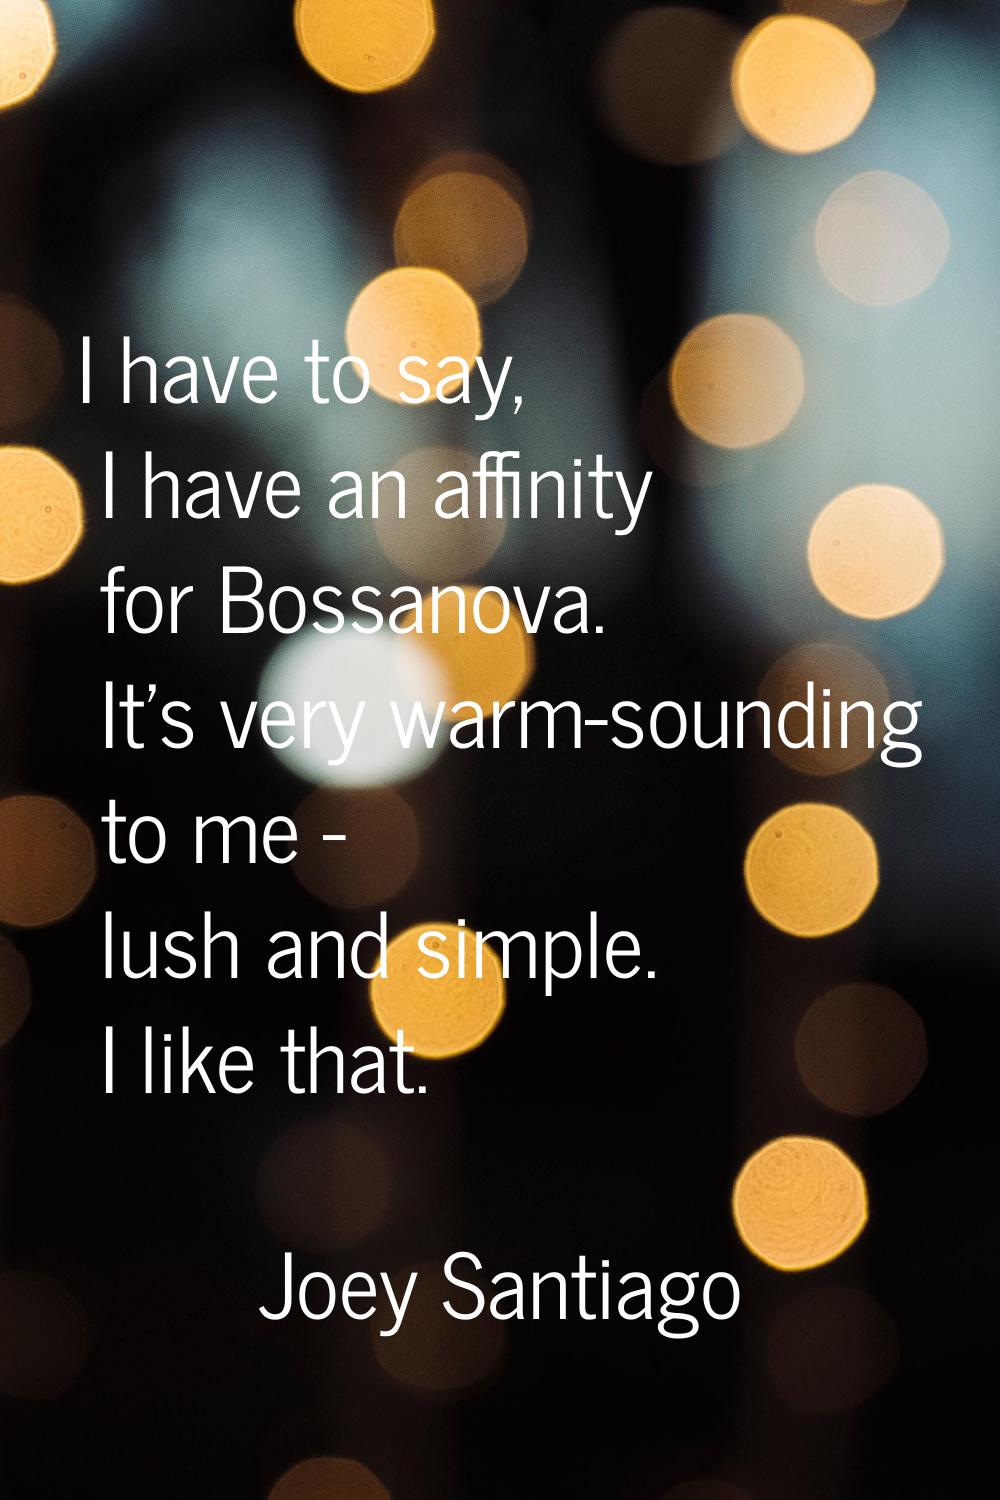 I have to say, I have an affinity for Bossanova. It's very warm-sounding to me - lush and simple. I